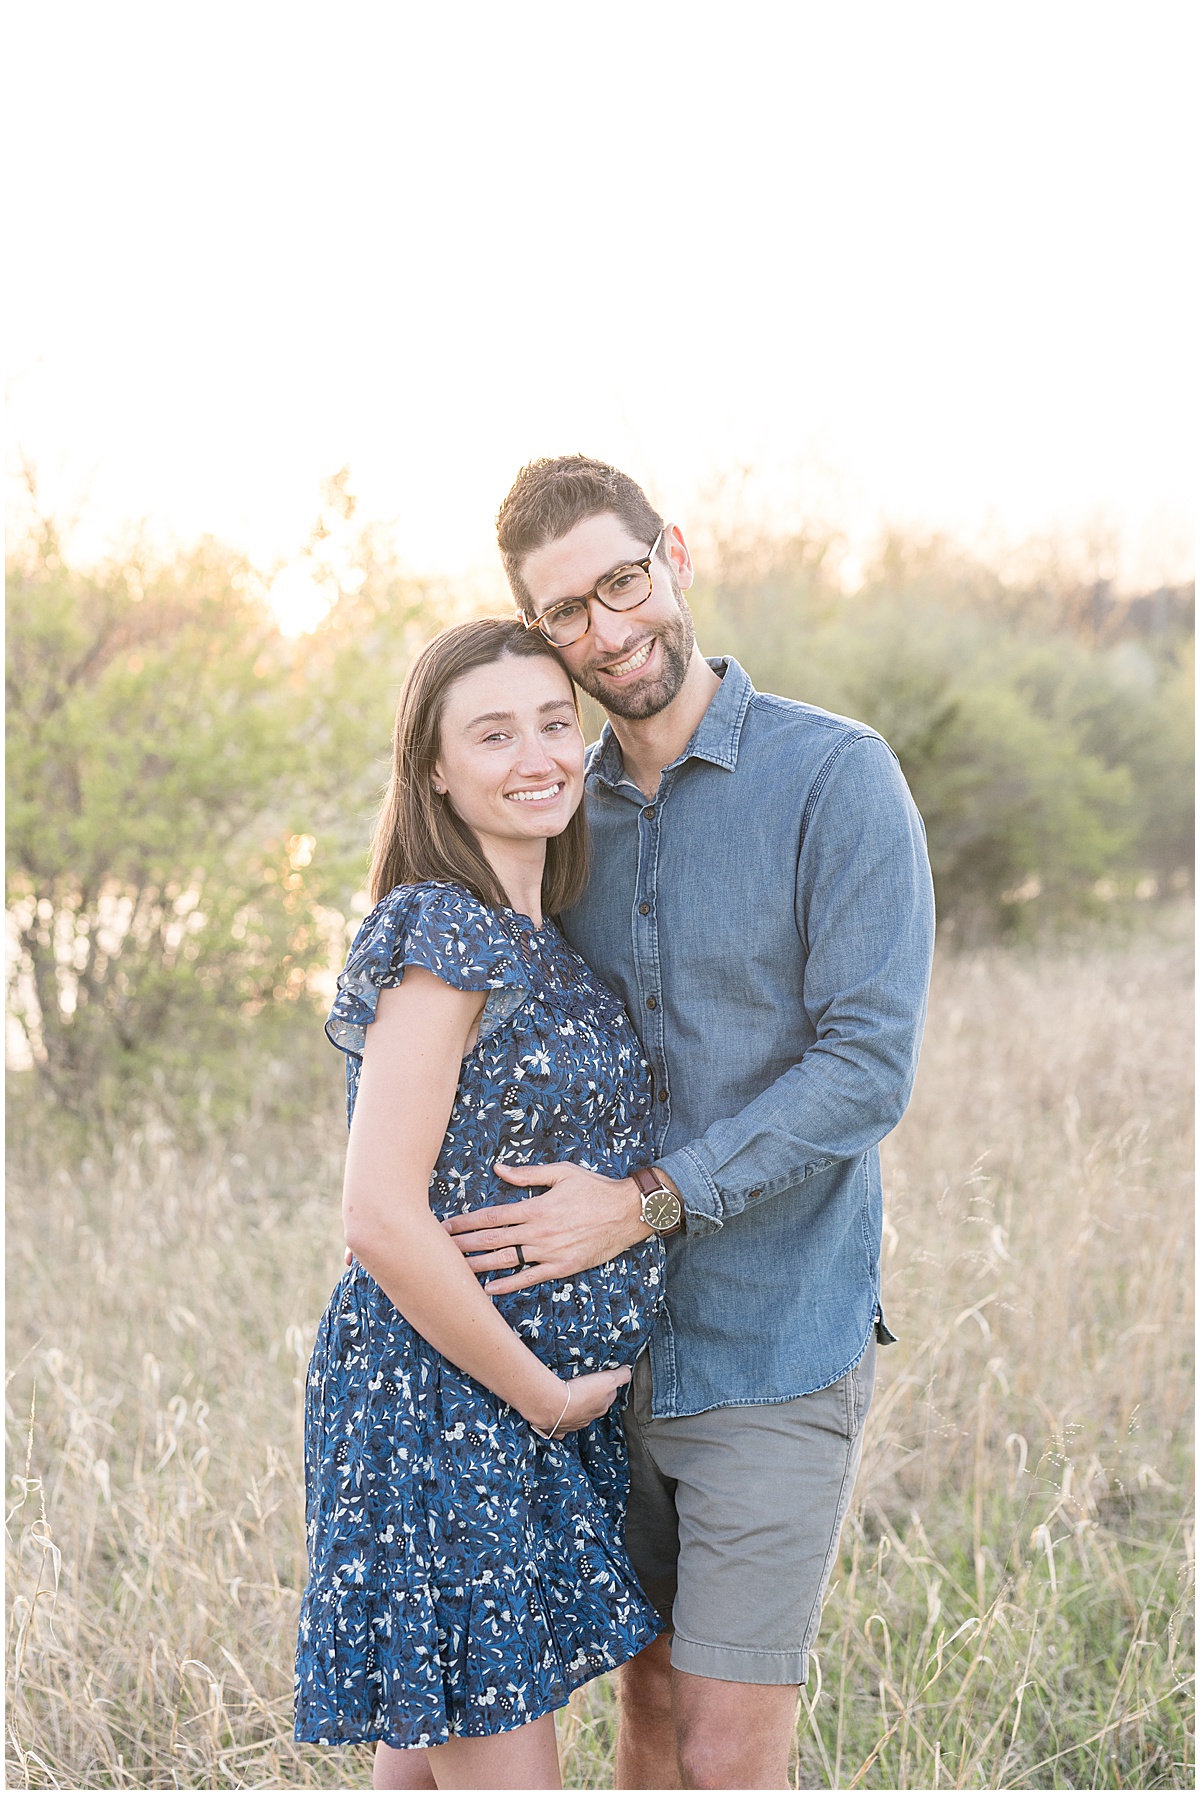 Spring maternity photos at Fairfield Lakes Park in Lafayette, Indiana